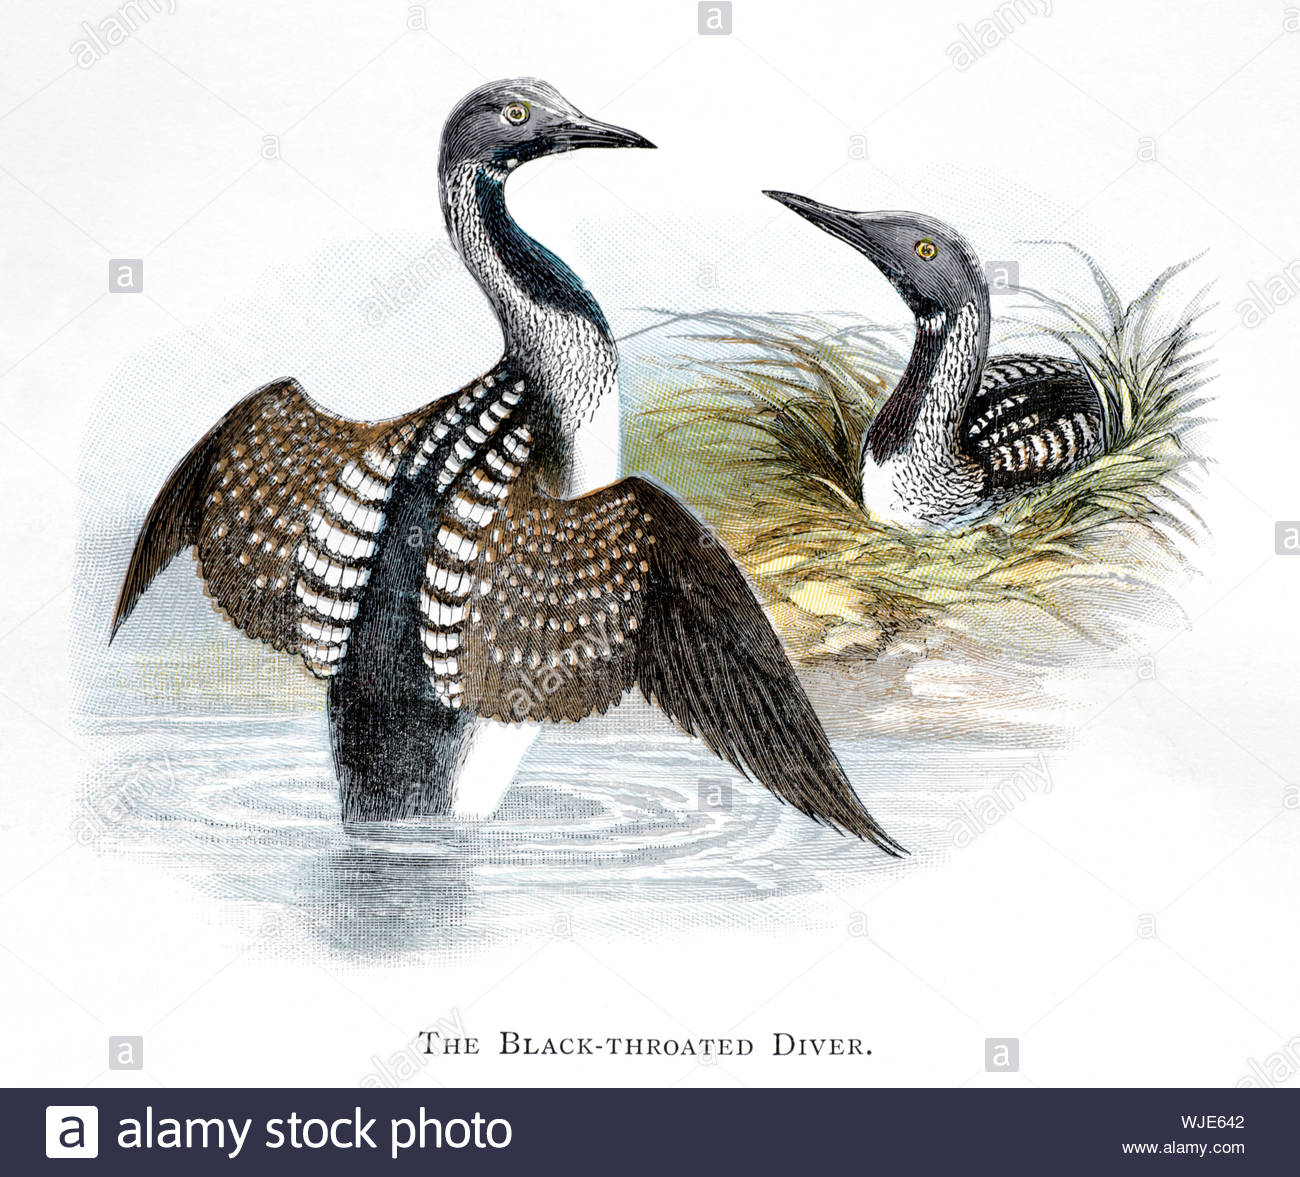 Black Throated Diver (Gavia arctica), vintage illustration published in 1898 Stock Photo